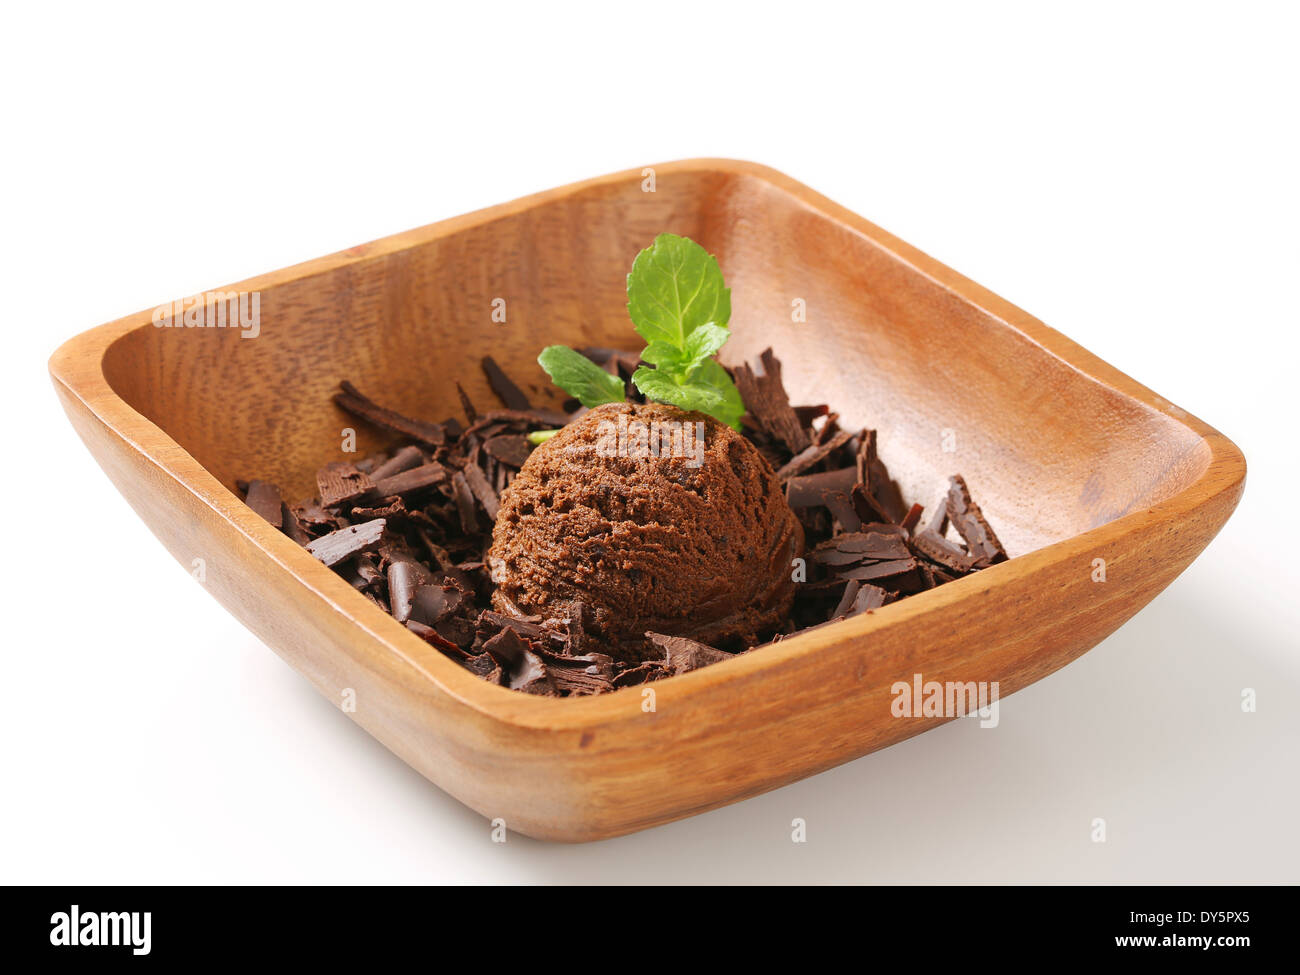 Scoop of ice cream and chocolate shavings in wooden bowl Stock Photo